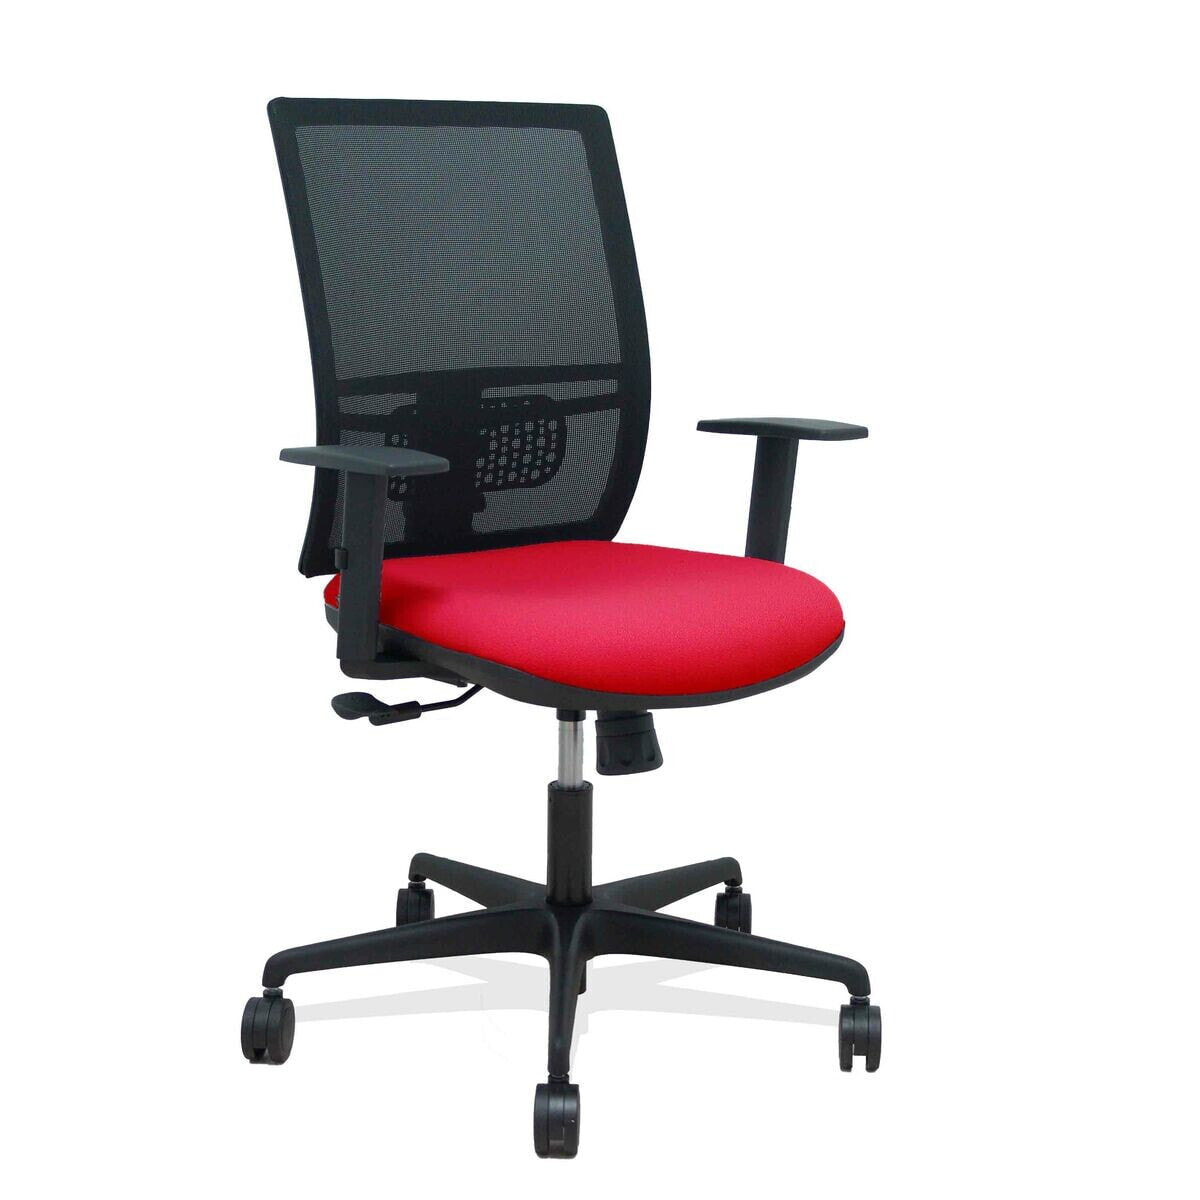 Office Chair Yunquera P&C 0B68R65 Red